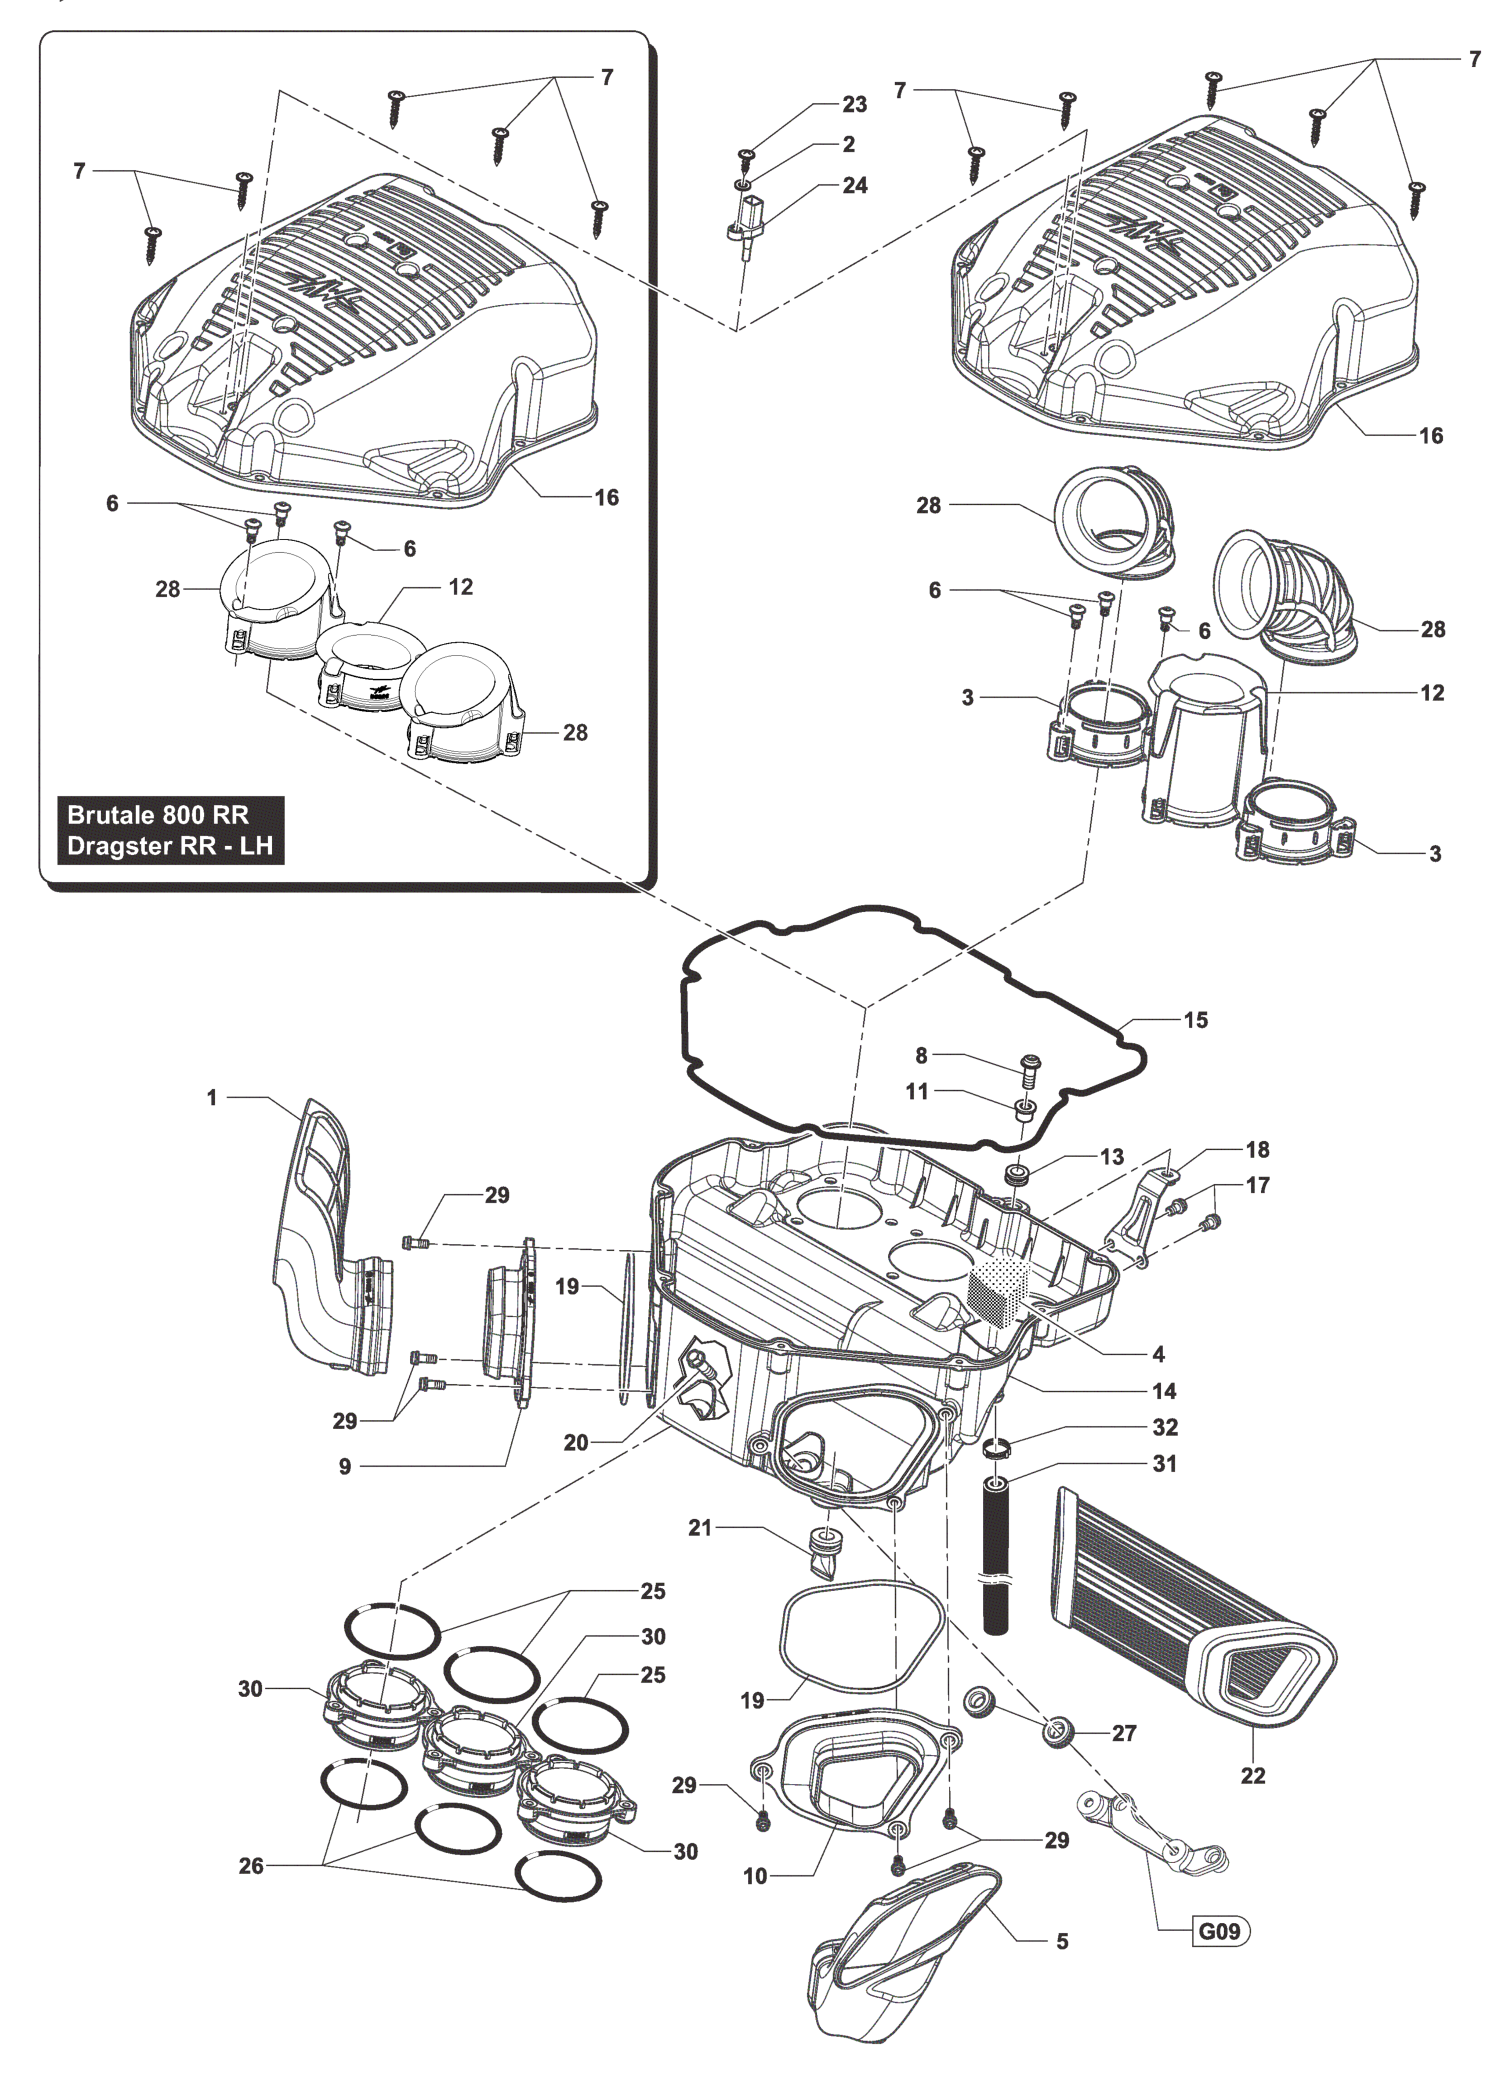 Airbox Assembly


